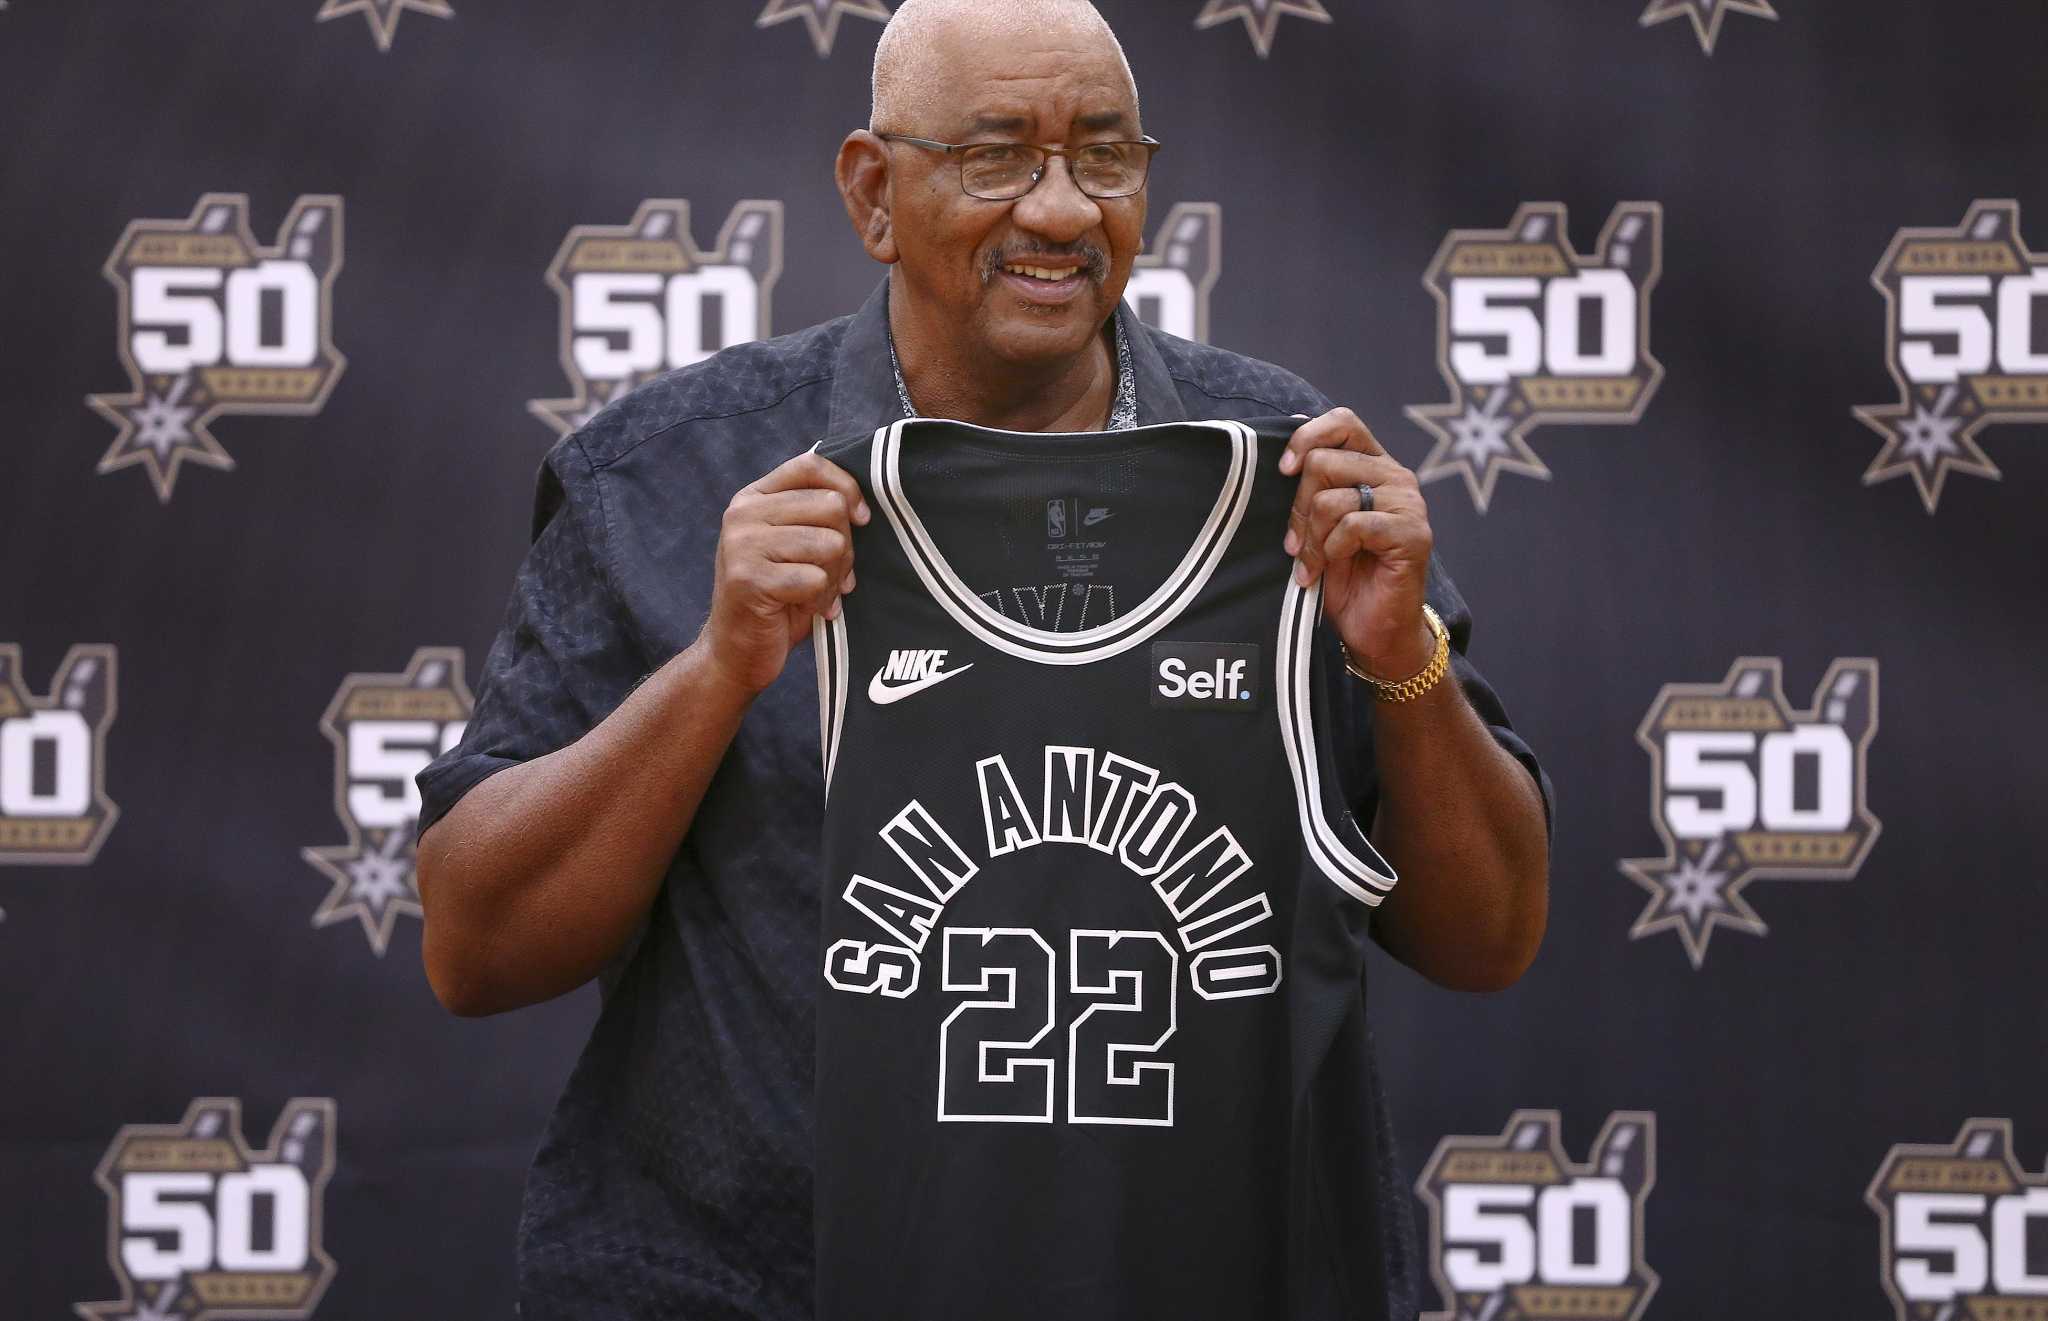 LOOK: Spurs 'Earned Edition' jersey revealed